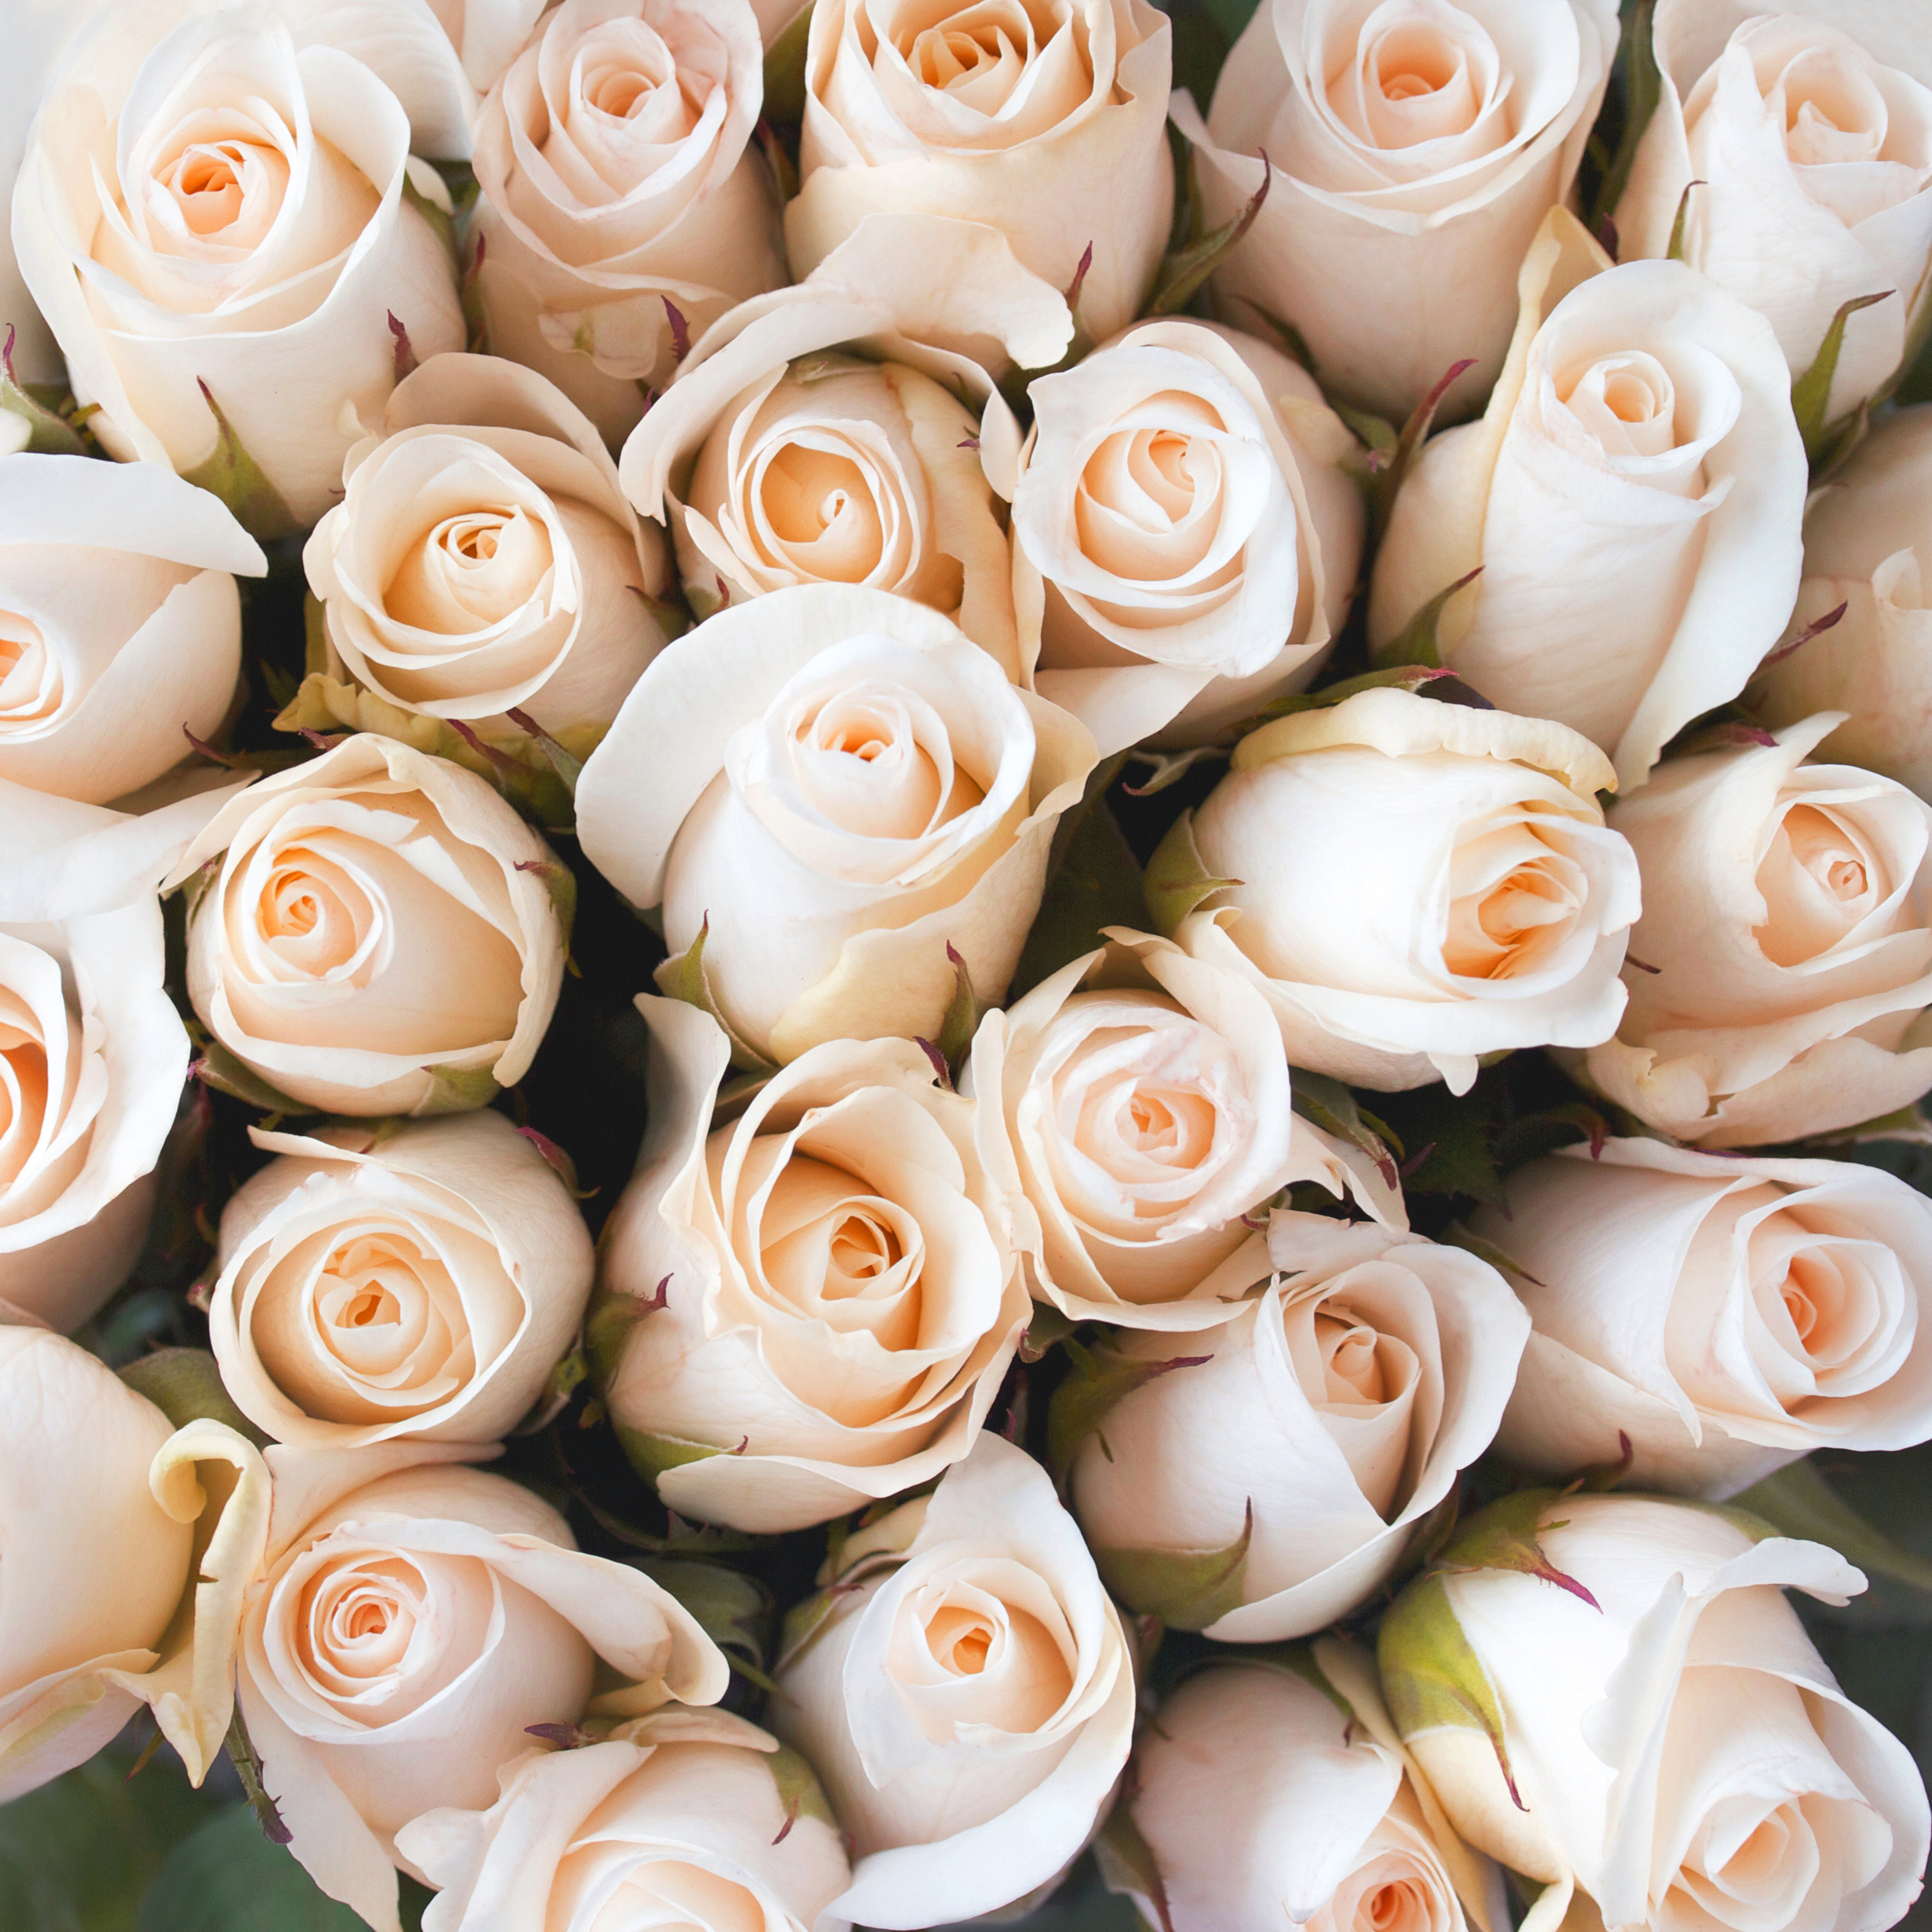 Wallpapers bouquet white roses many roses on the desktop